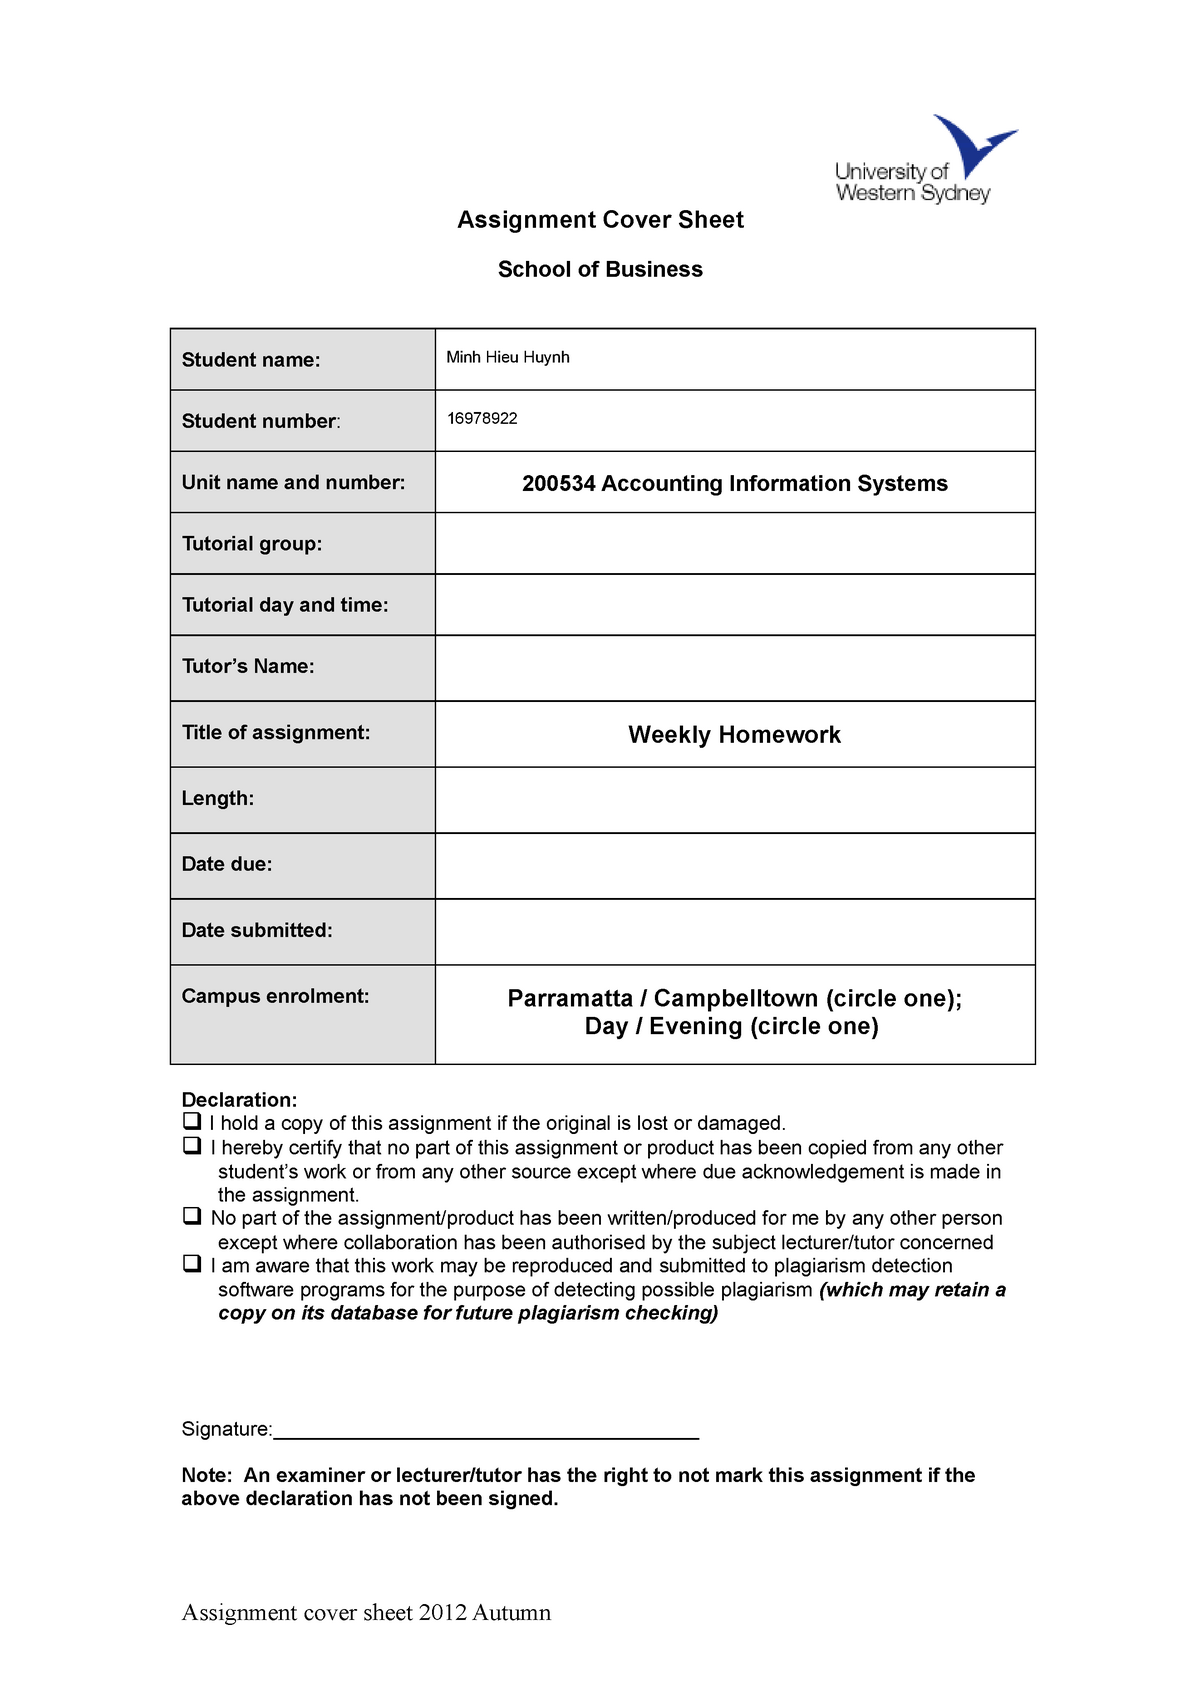 acu assignment cover sheet